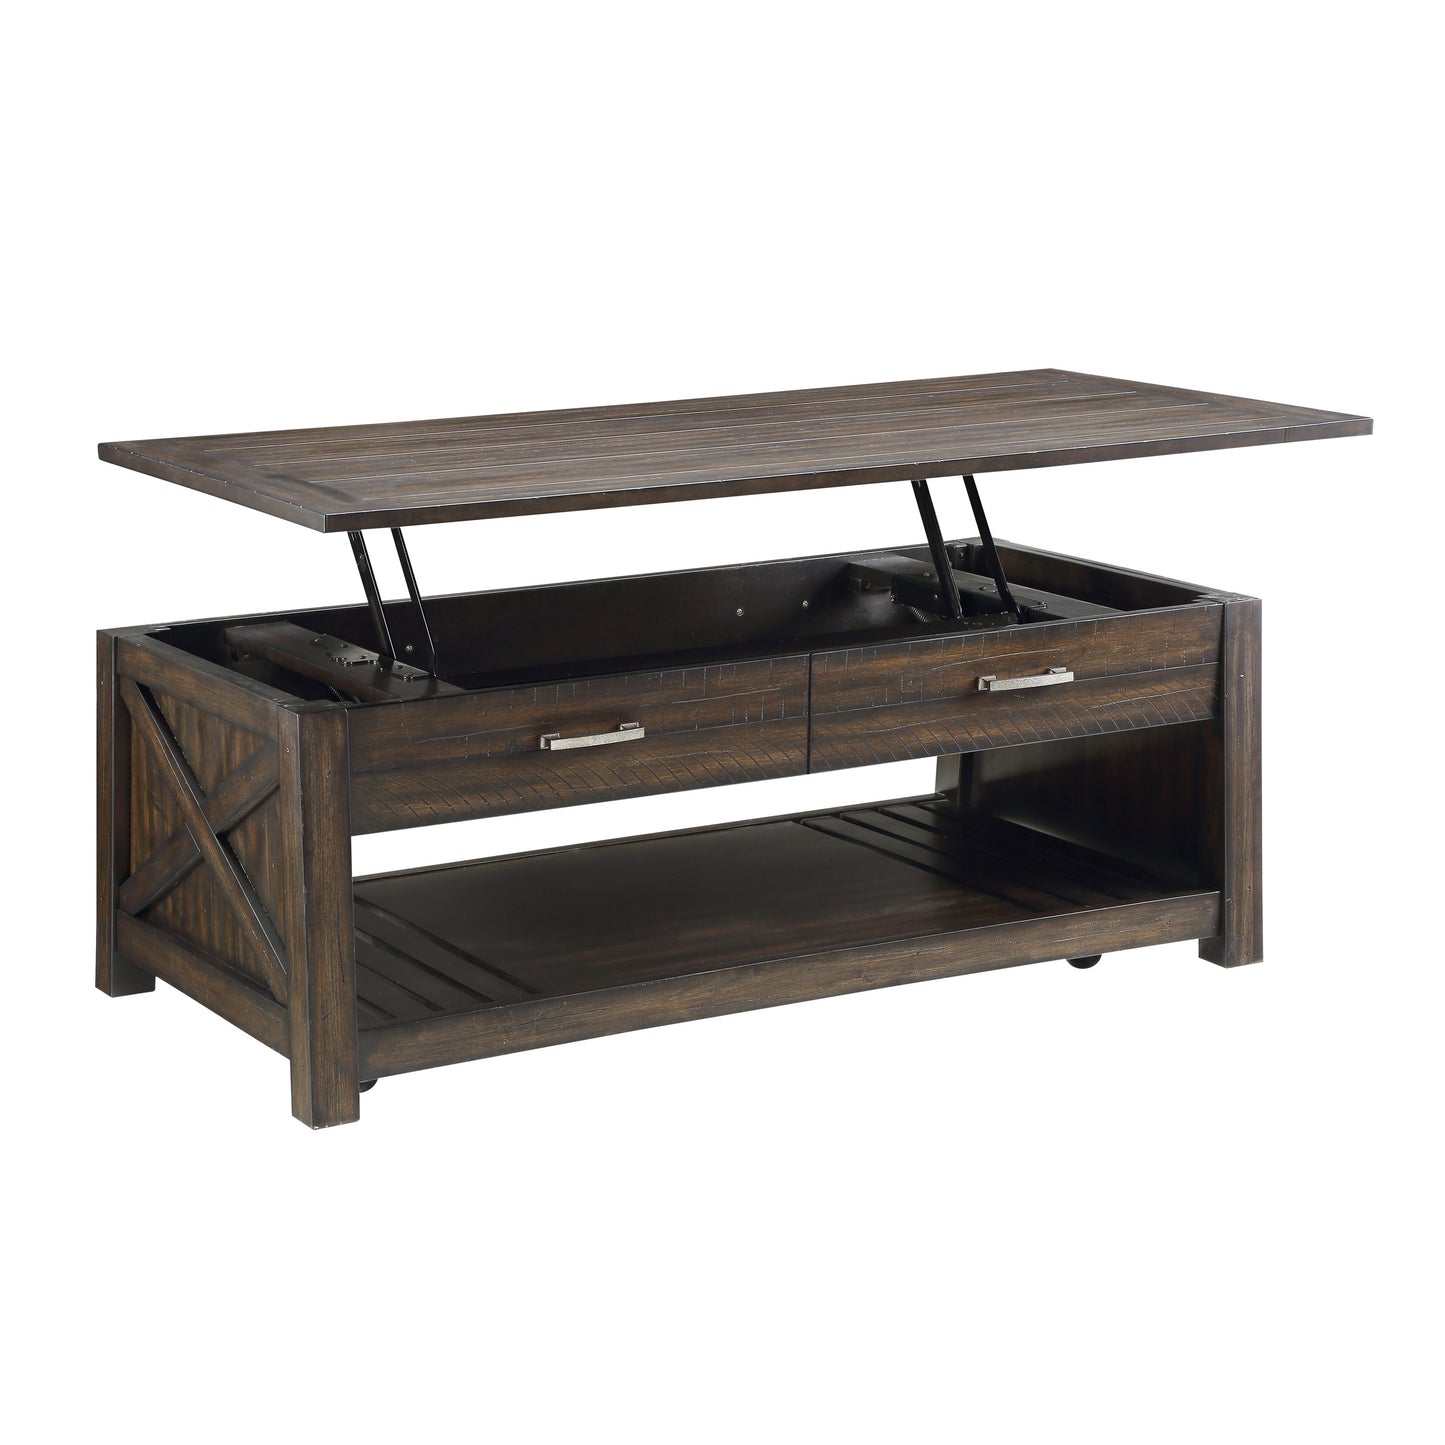 Traine Lift Top Coffee Table DARK BROWN ONLY